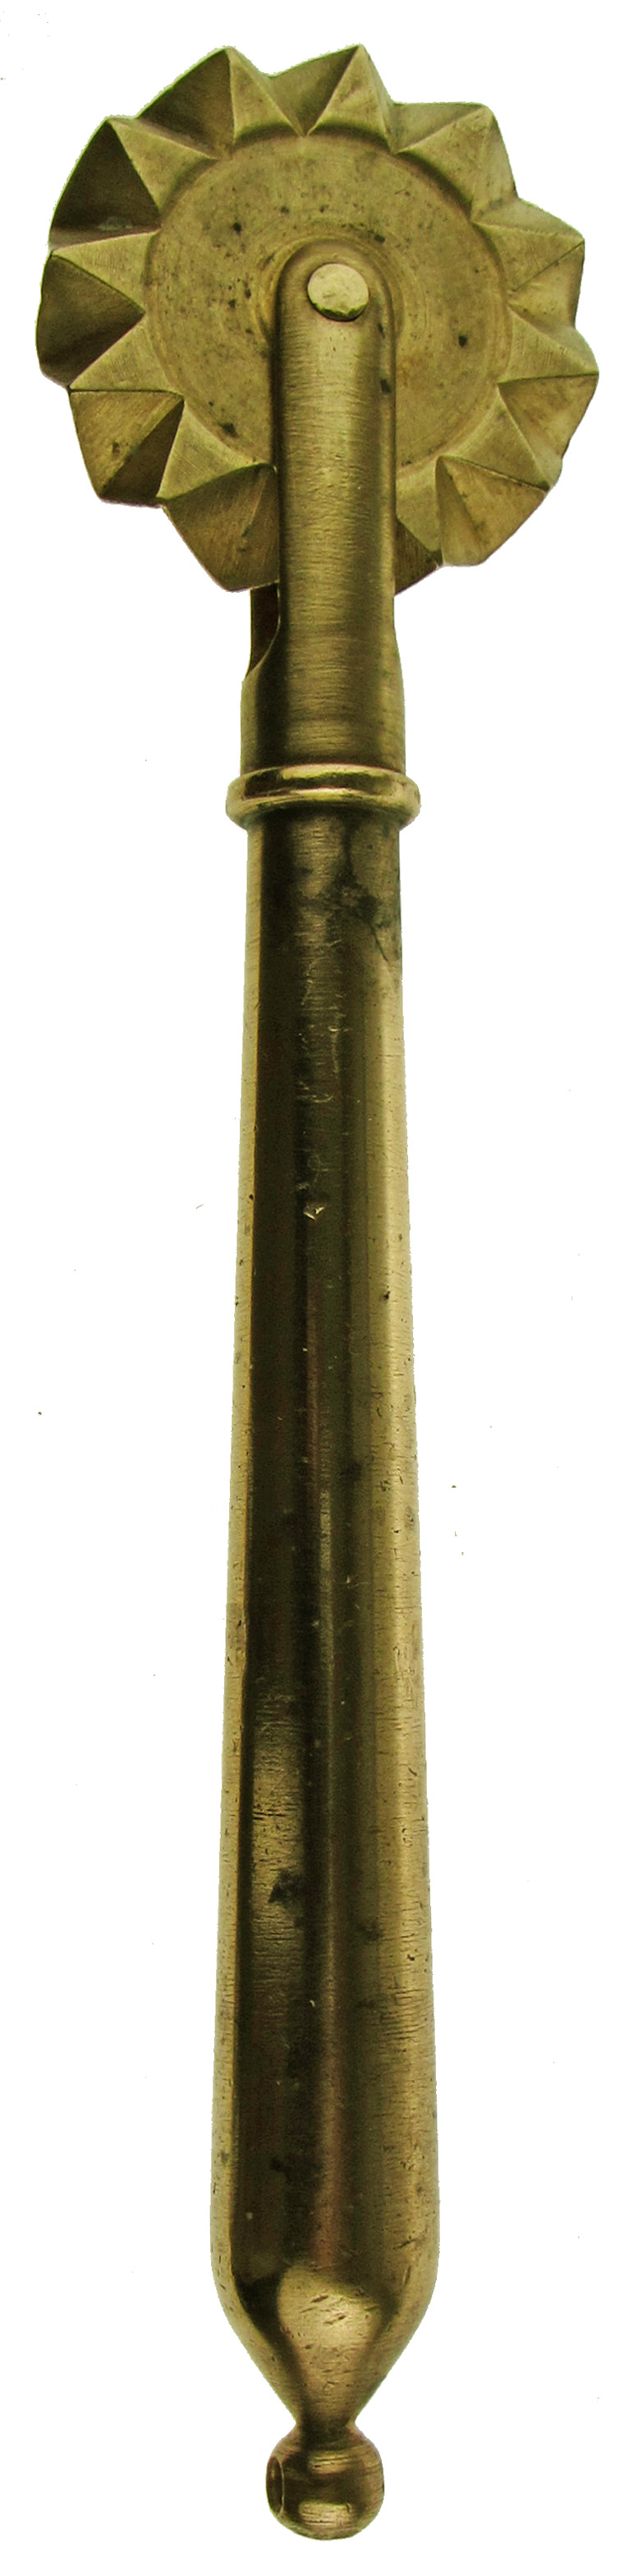 A 19TH CENTURY COPPER-ALLOY PASTRY JIGGER with tapering stem and wheel, the terminal with later ring